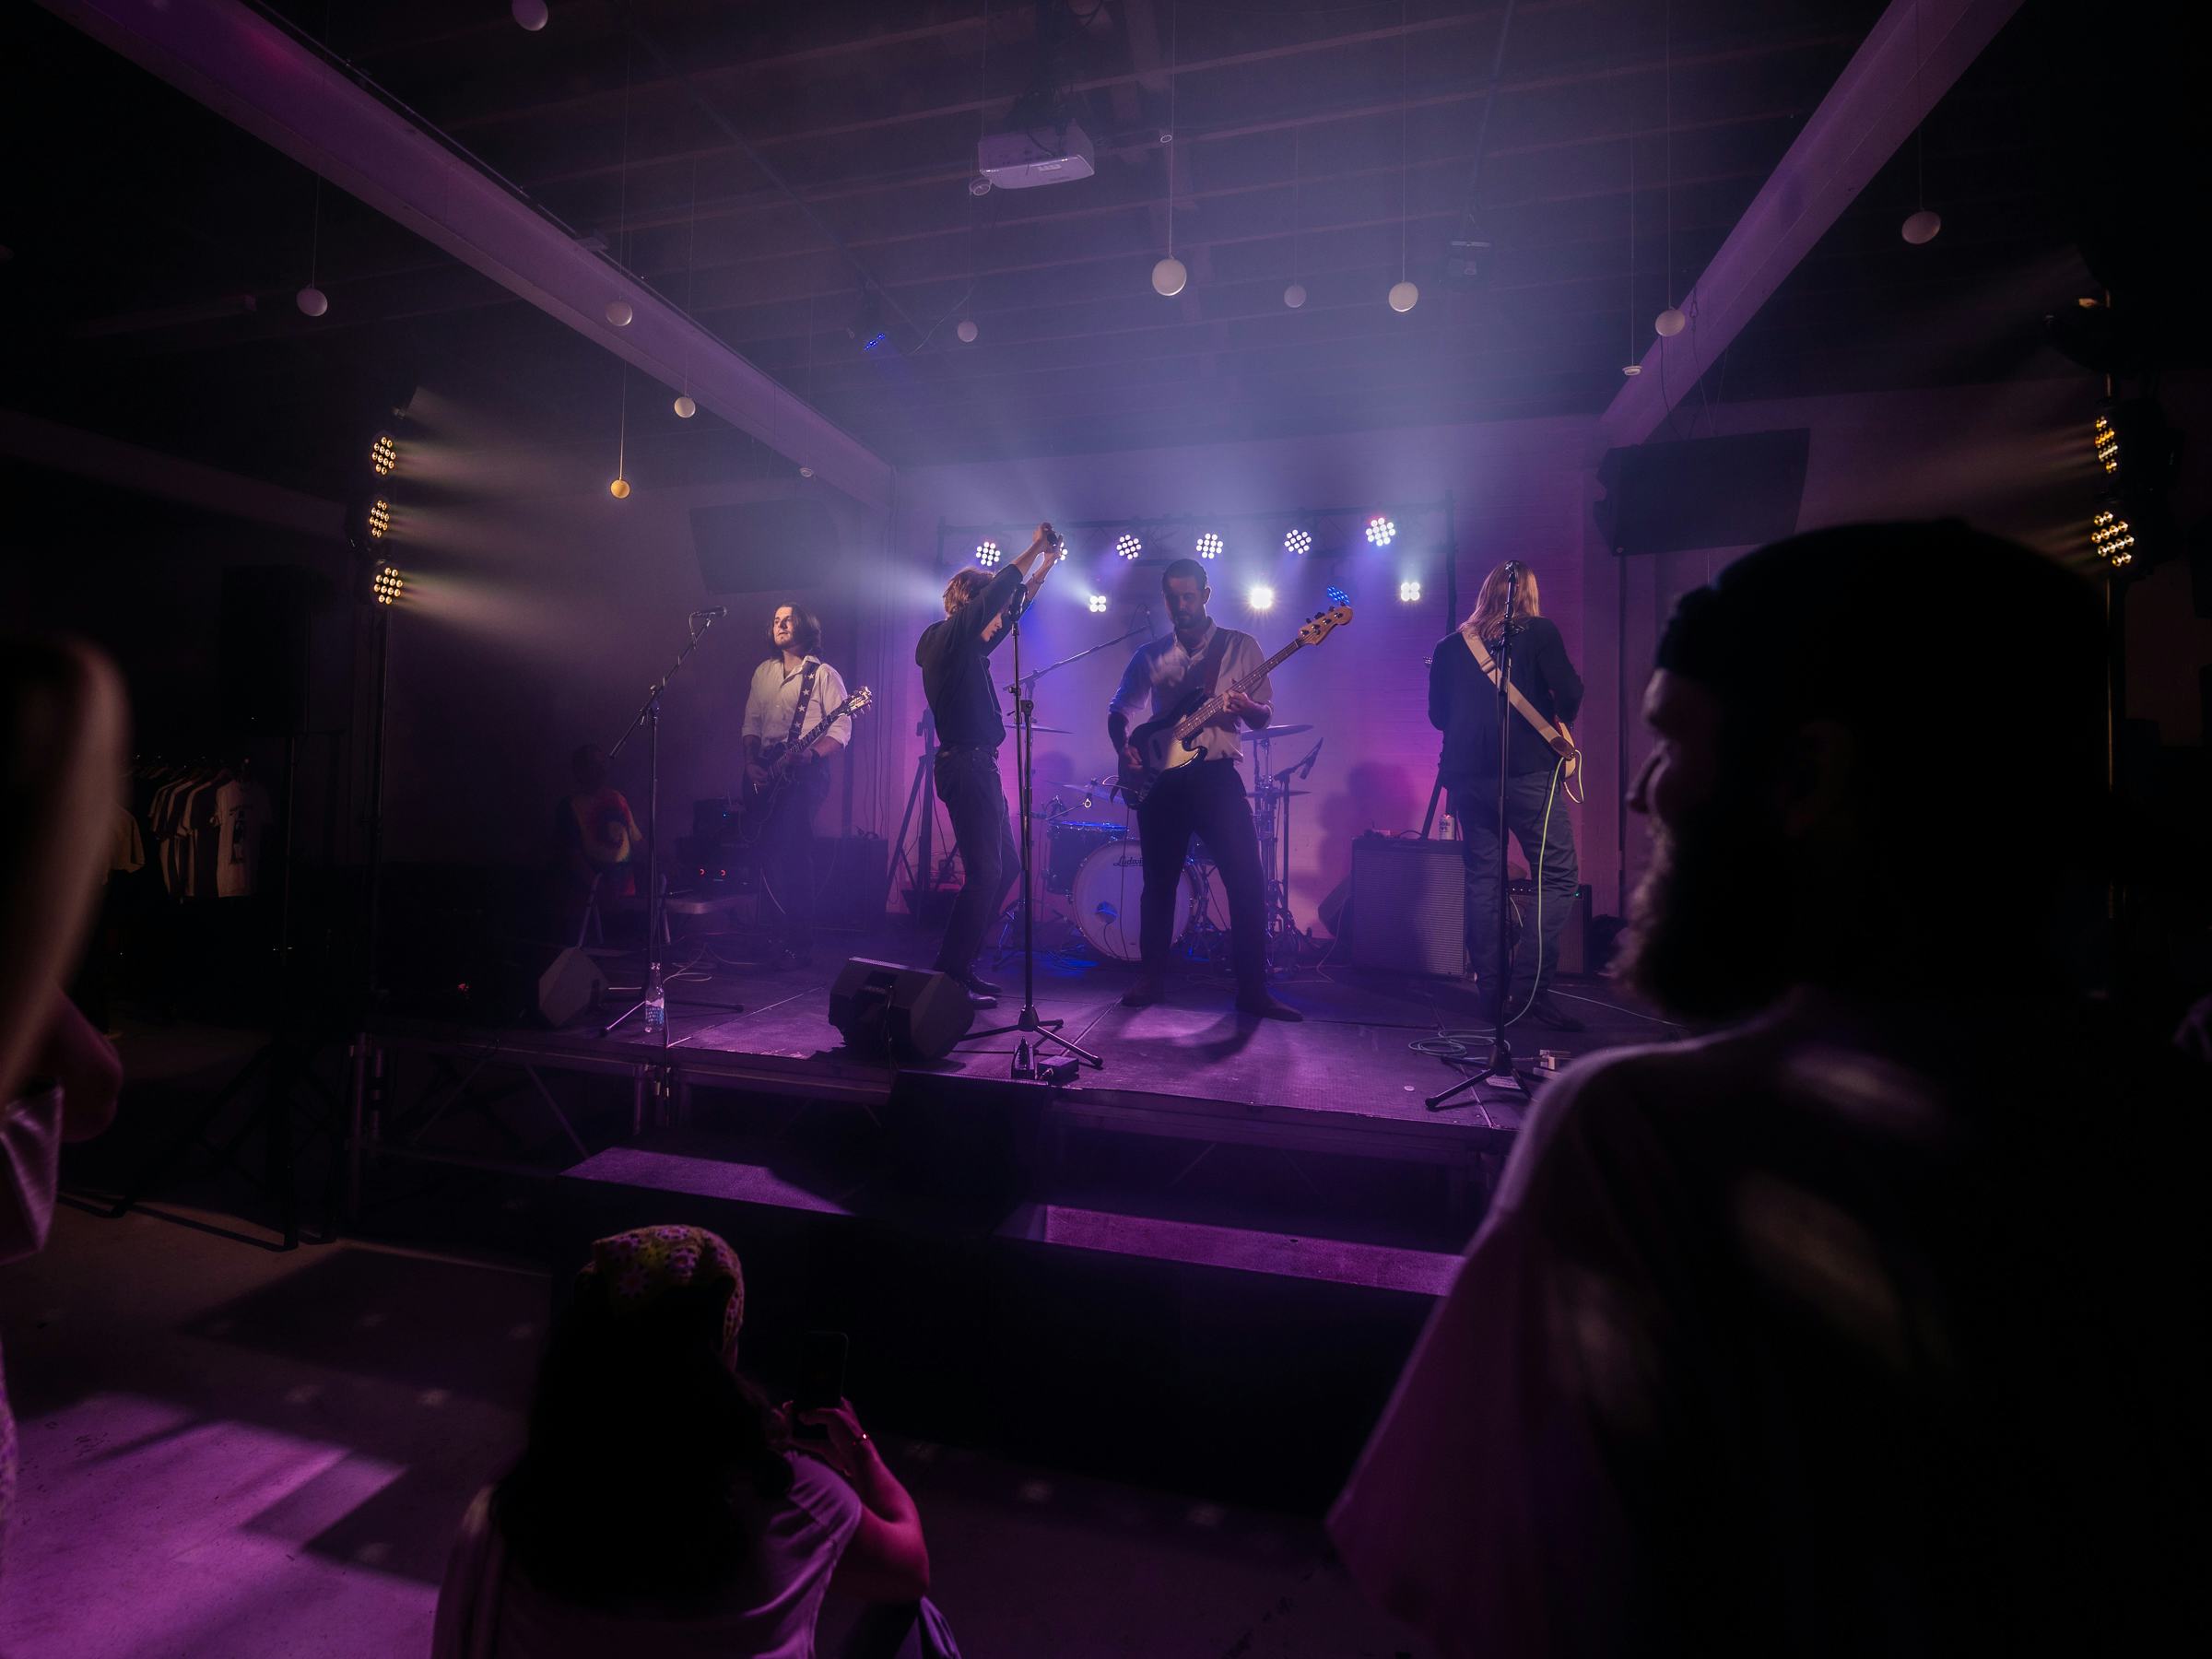 Photo of rock musicians performing on stage in a small music venue